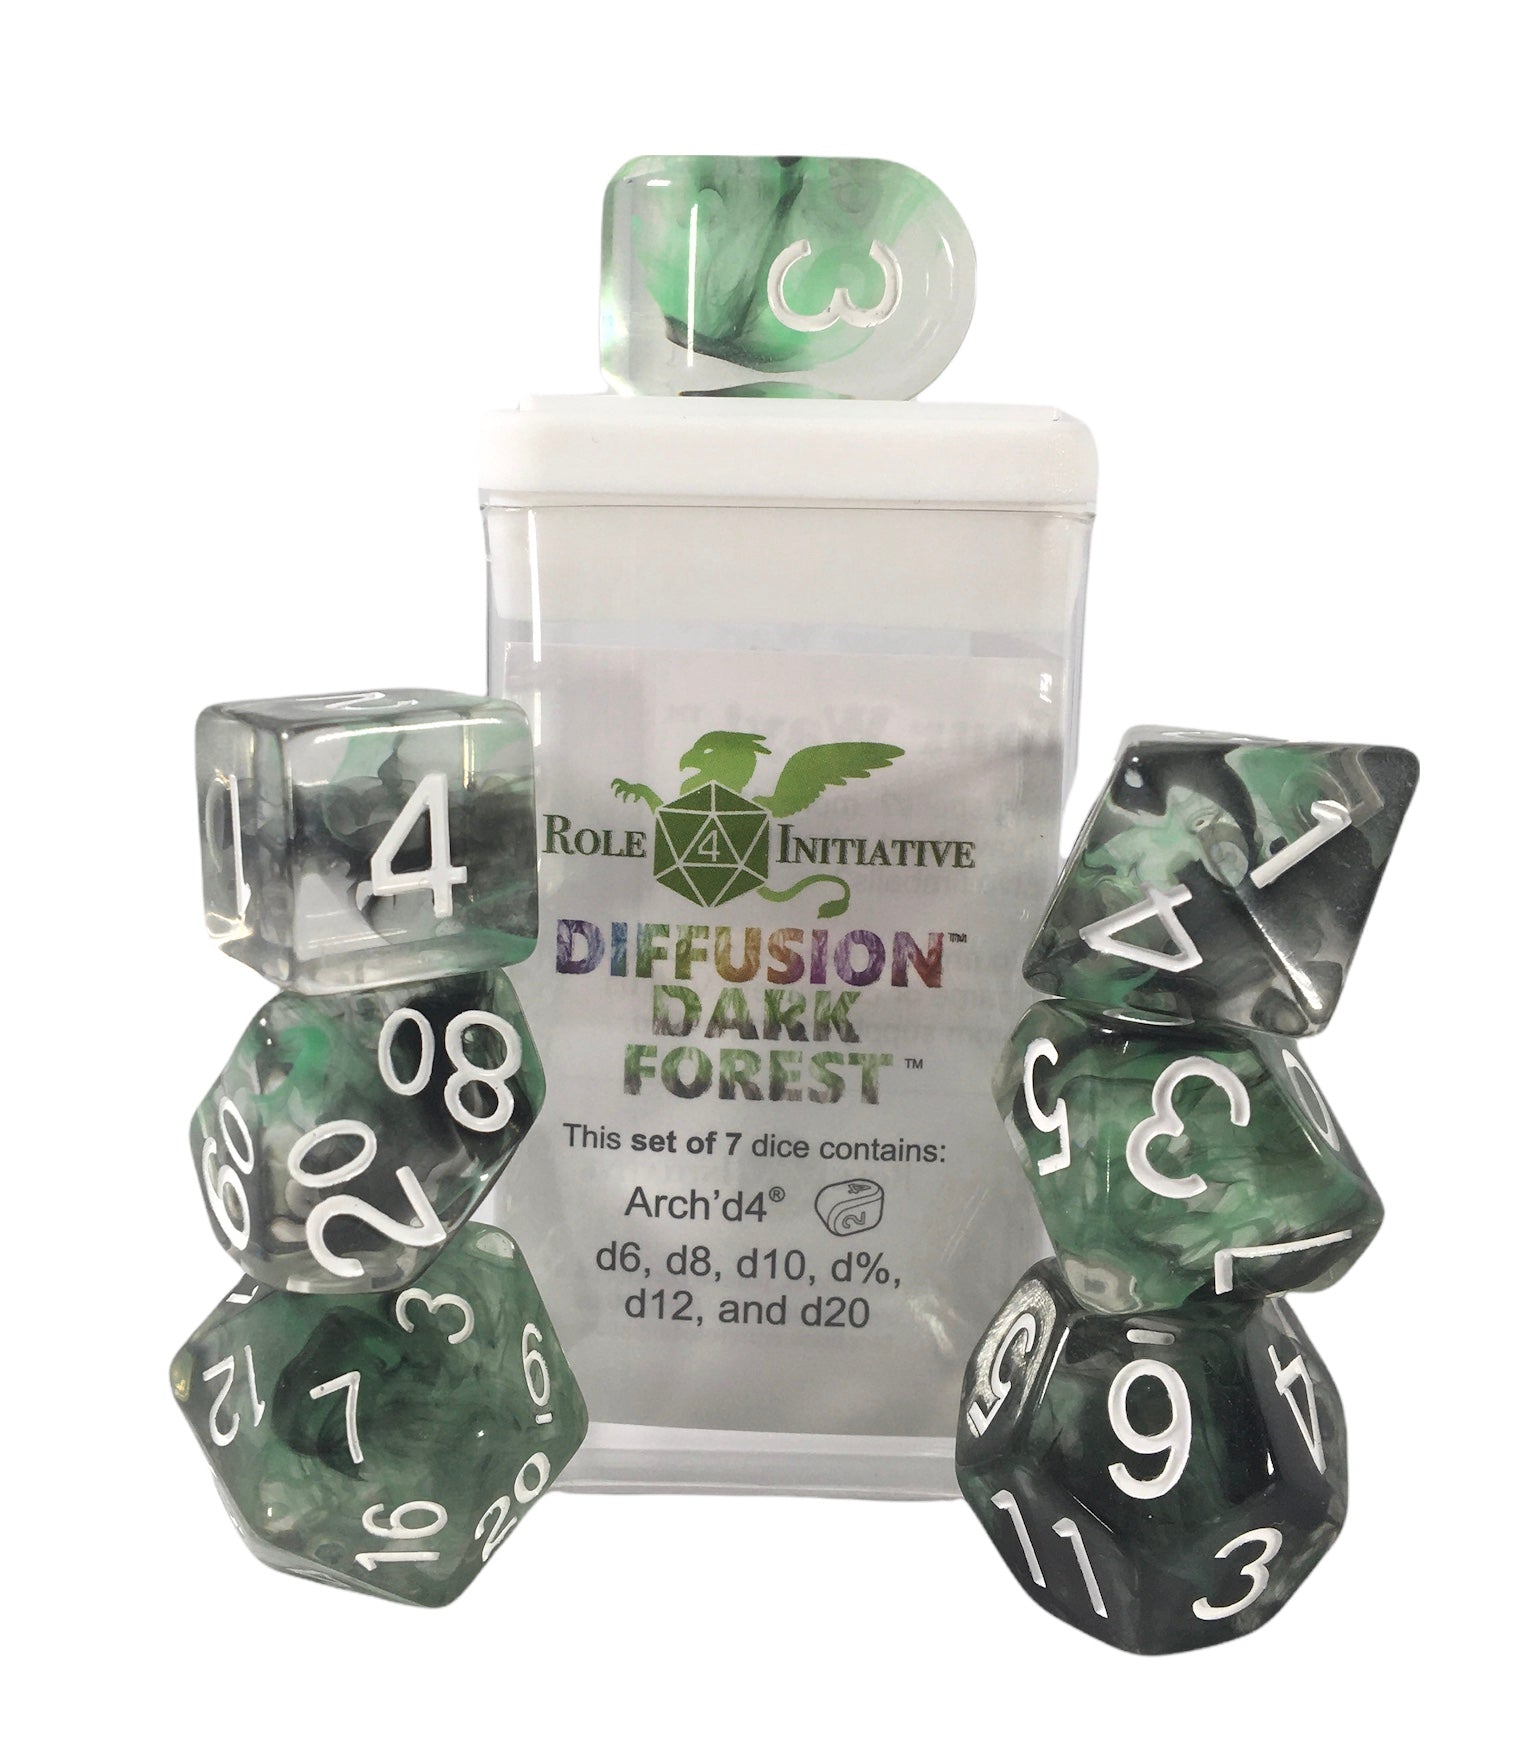 Dice Diffusion Dark Forest - Sets  Singles Set of 7 w/ Arch'd4 in box